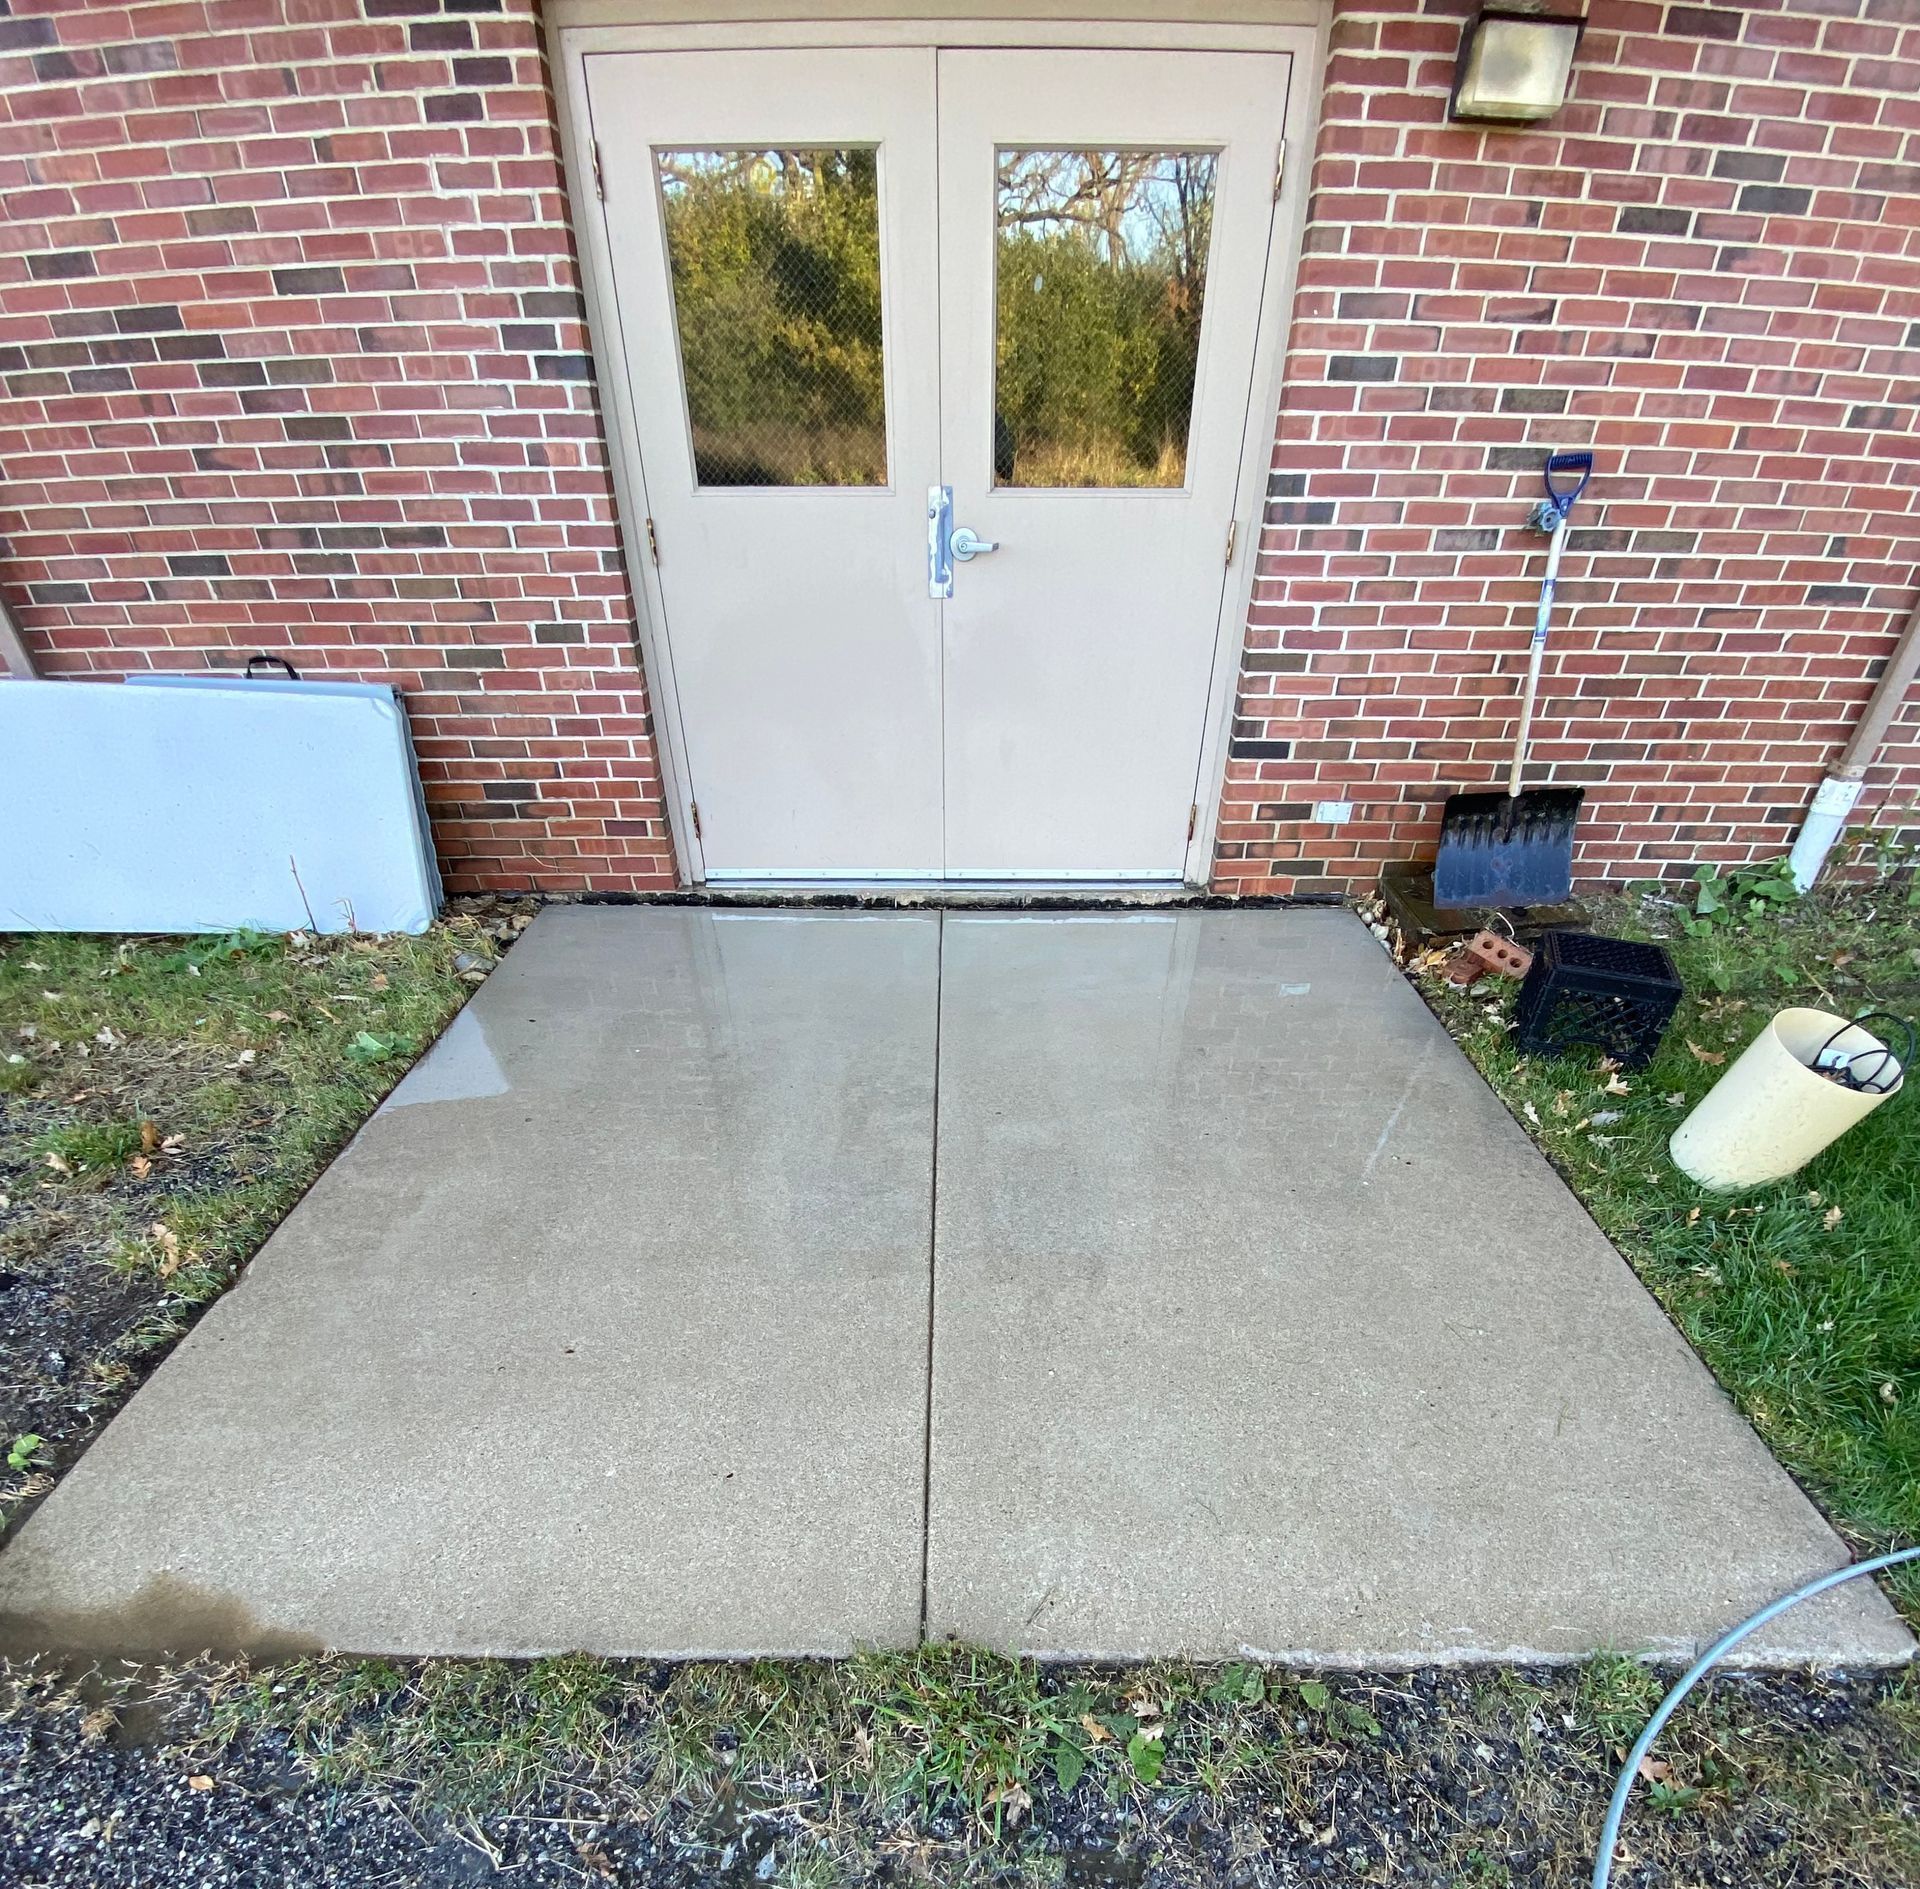 Clean Siding - Lake Zurich, IL - Peter’s Power Wash Services